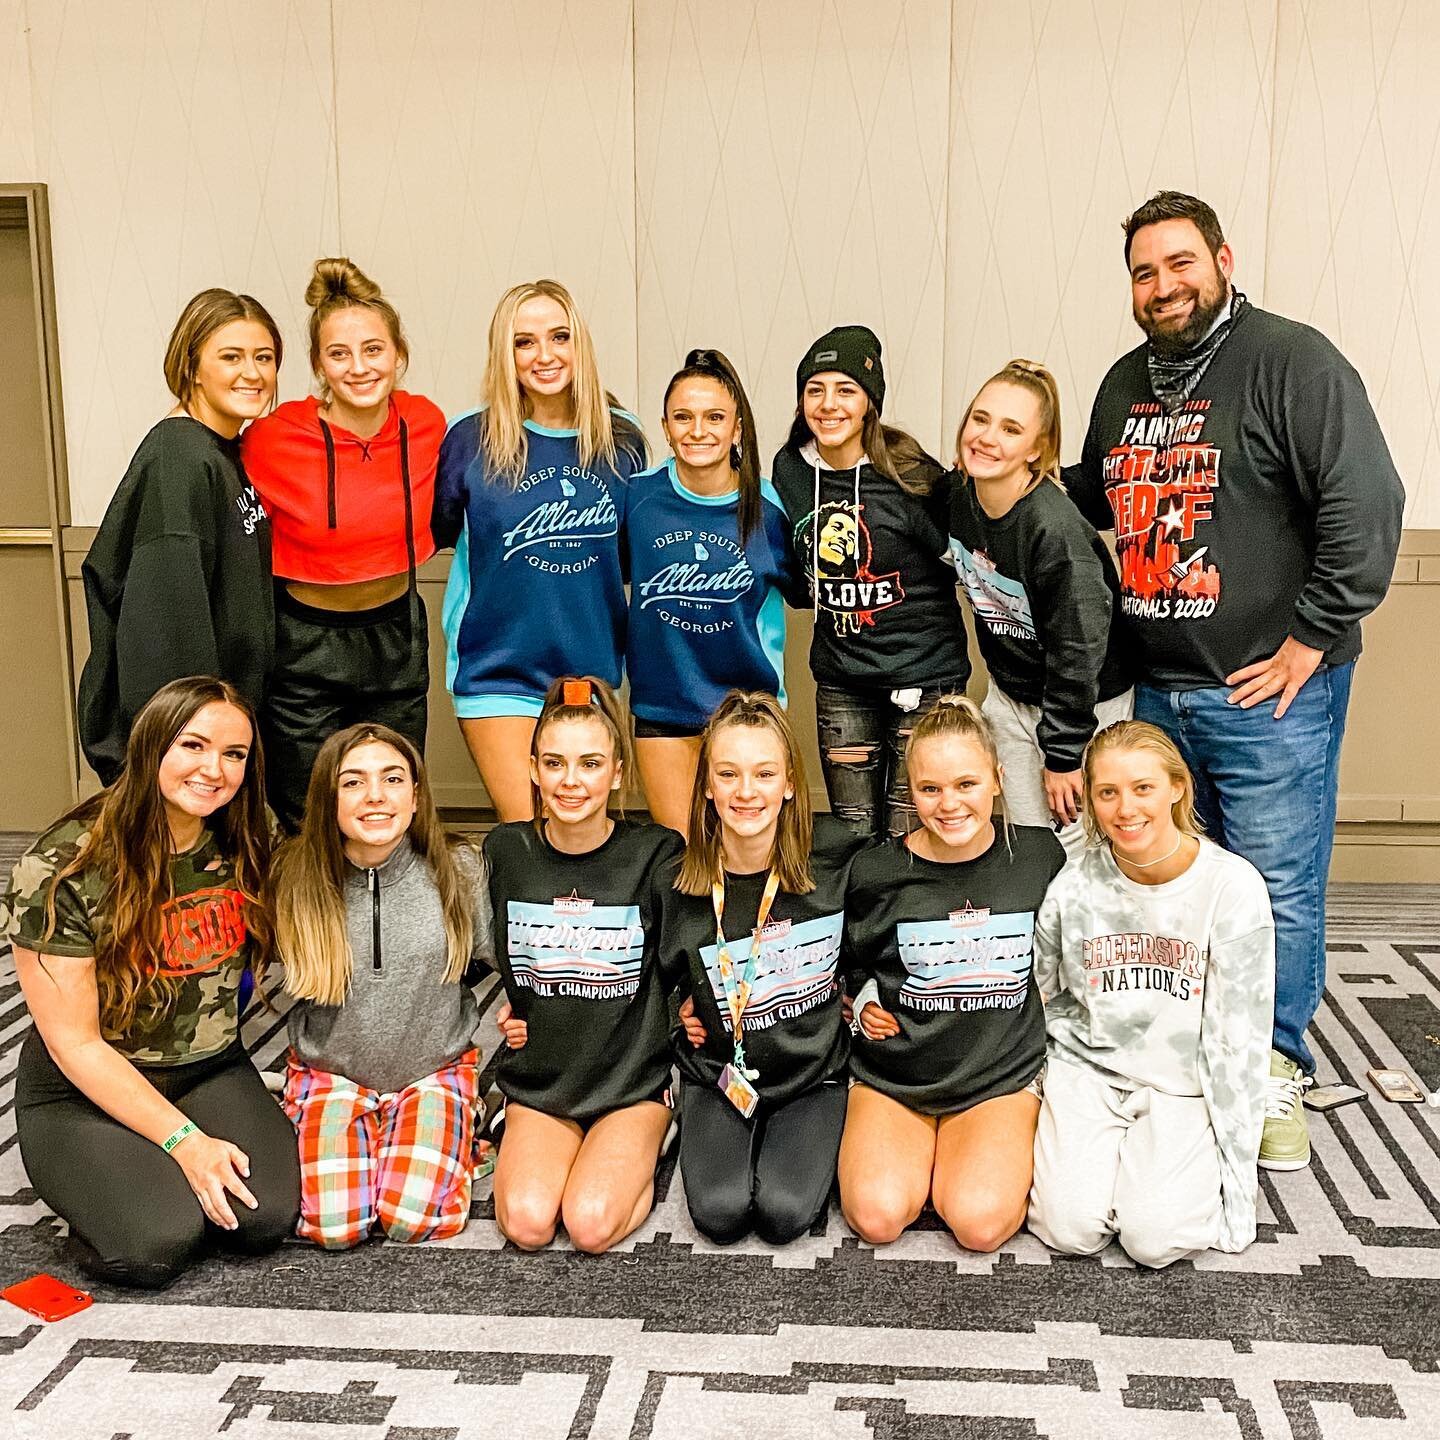 CONGRATS to FUSION BOMB SQUAD on a great CheerSport weekend!!! We are SO PROUD of you and the legacy you are building here at Fusion!!! Keep working hard, continue to be incredible examples to the other athletes in our gym, and continue to learn and 